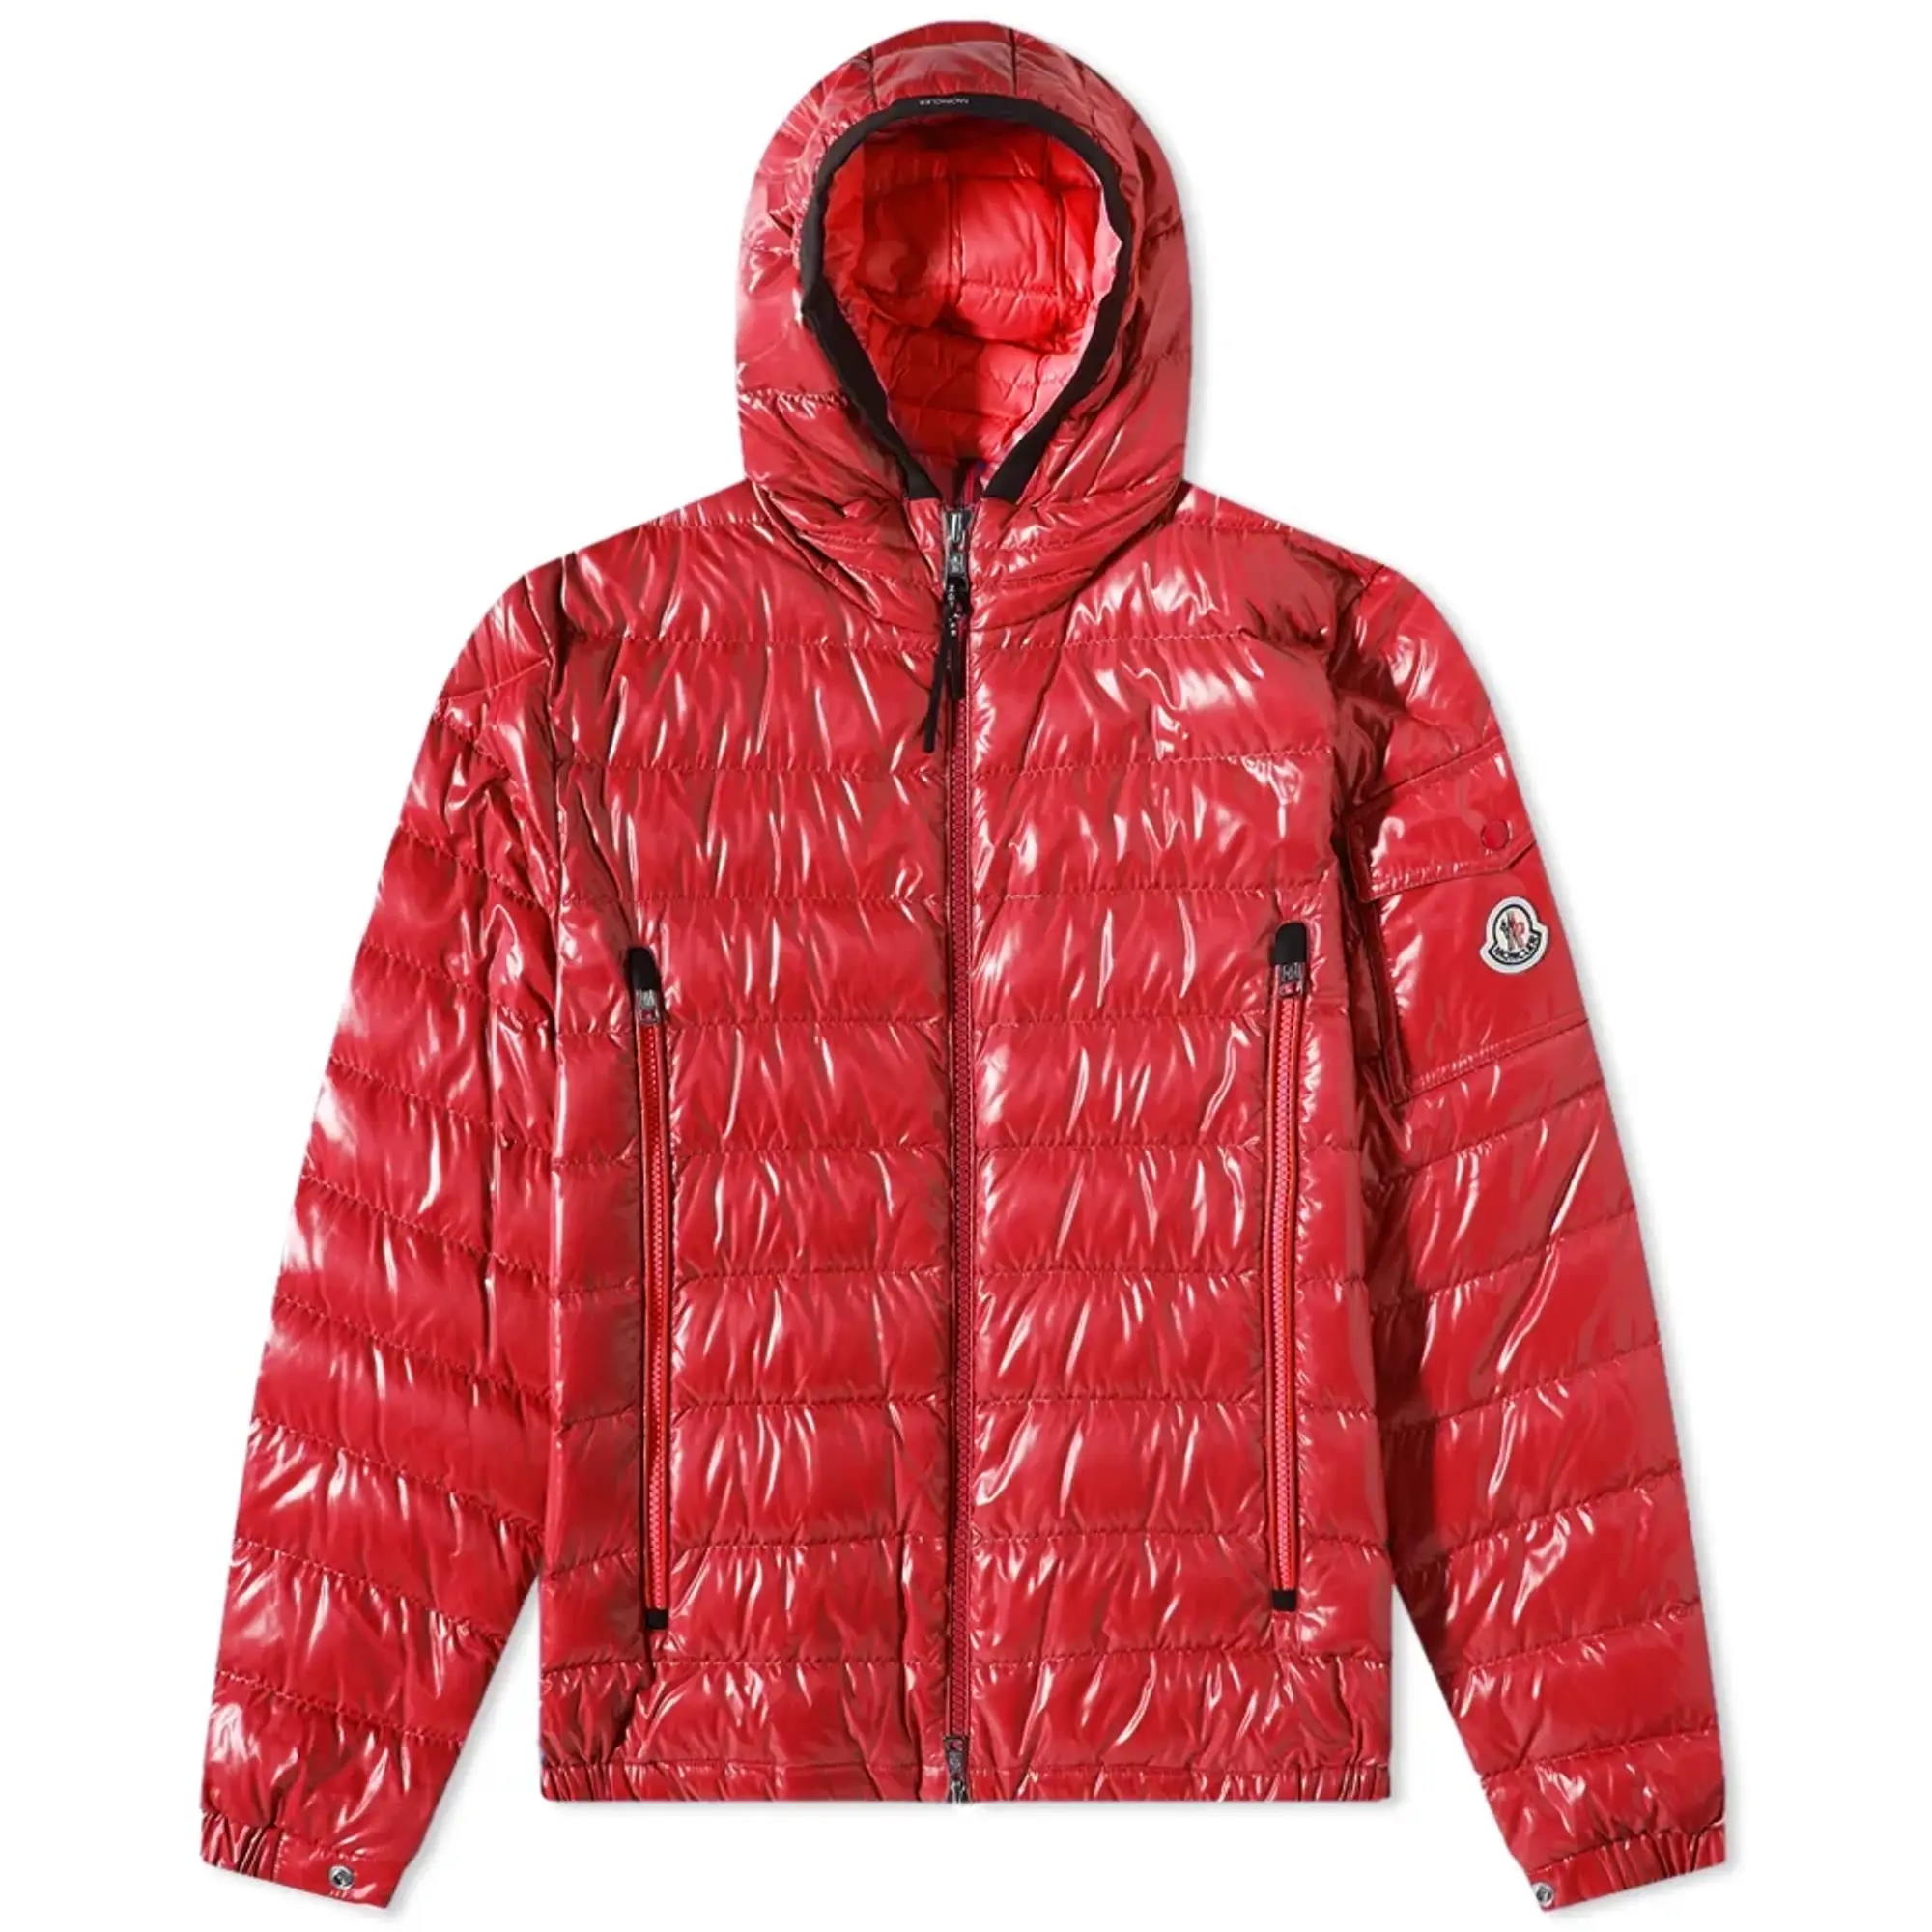 Moncler Men's Galion Hooded Down Jacket Red